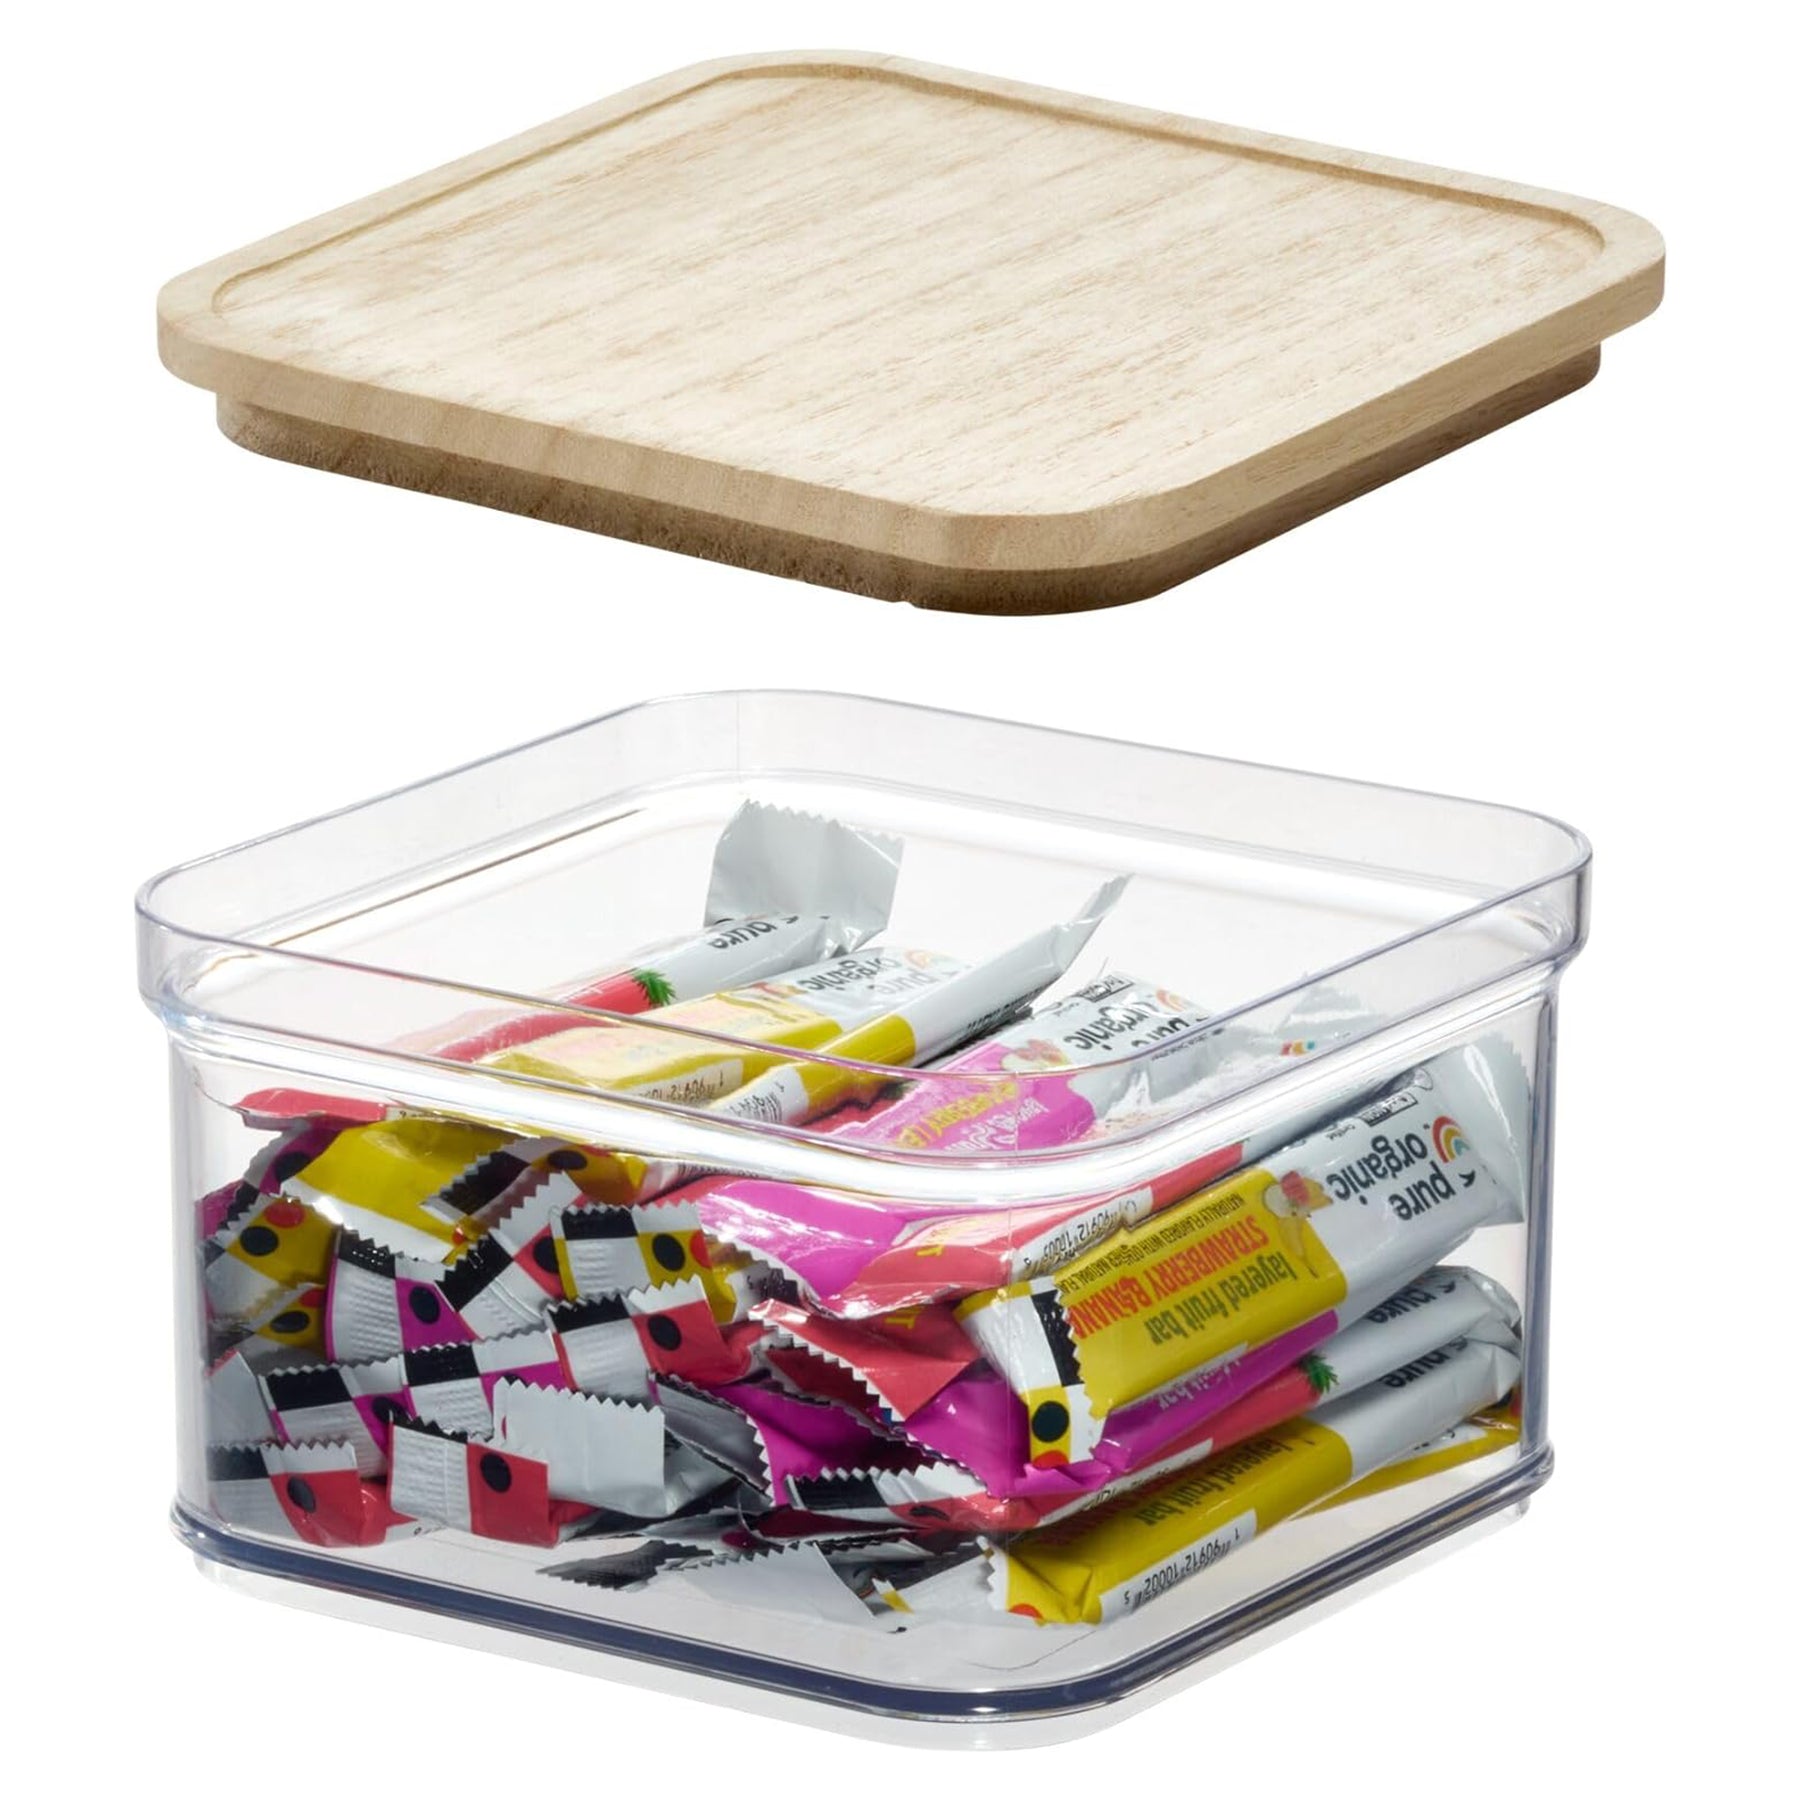 The Rosanna Pansino Collection Recycled Plastic Crisp Storage Bin with Lid